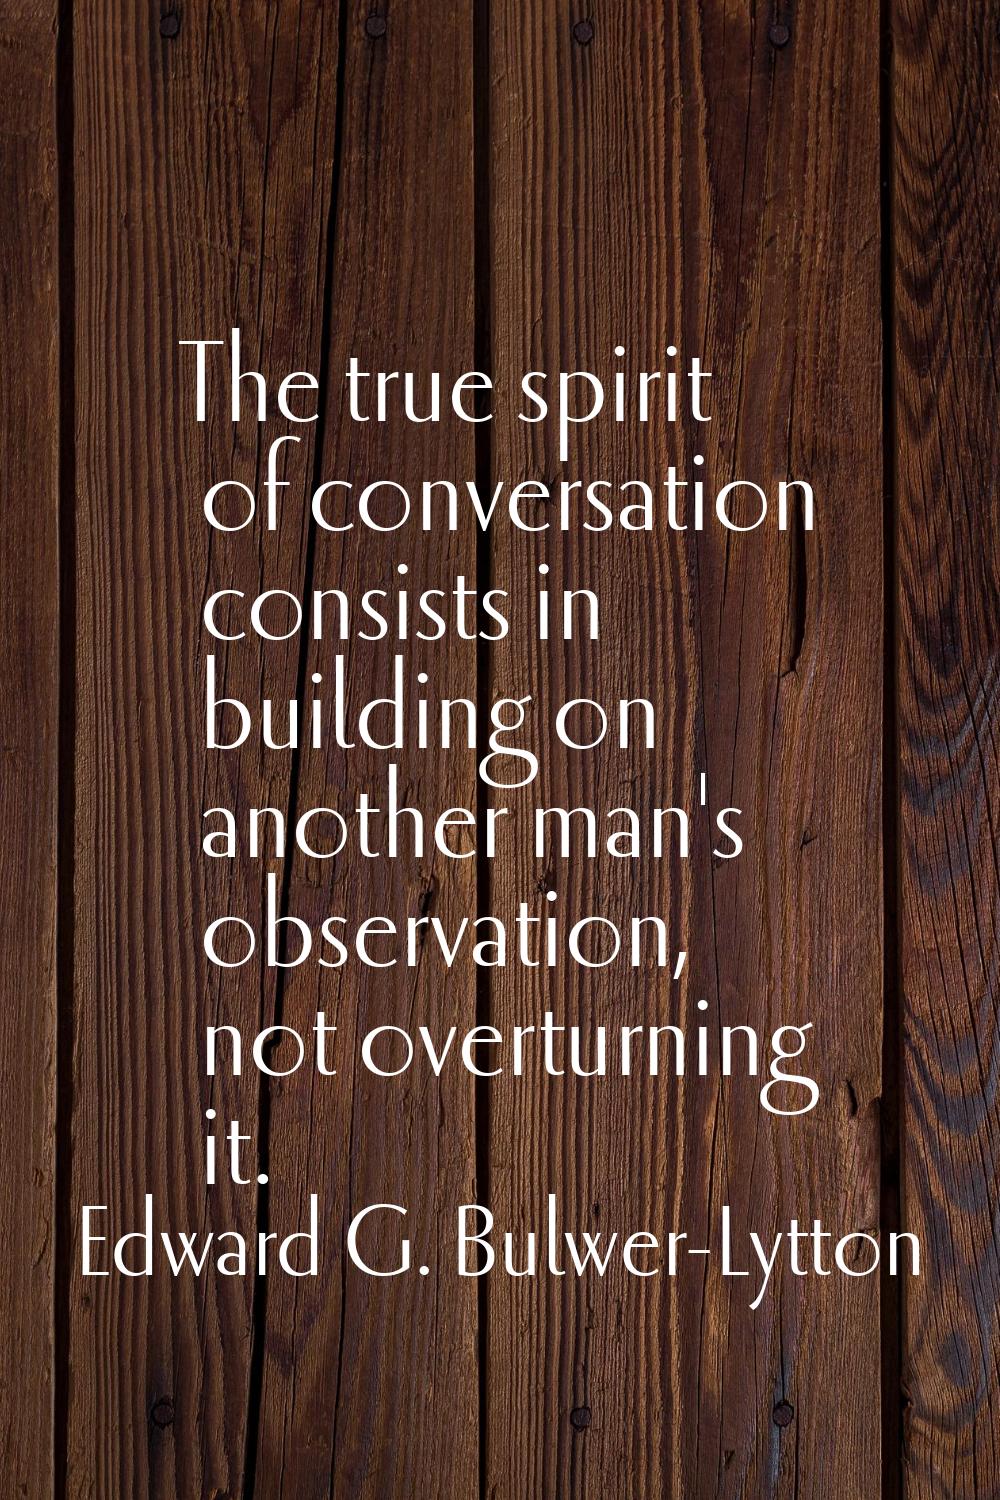 The true spirit of conversation consists in building on another man's observation, not overturning 